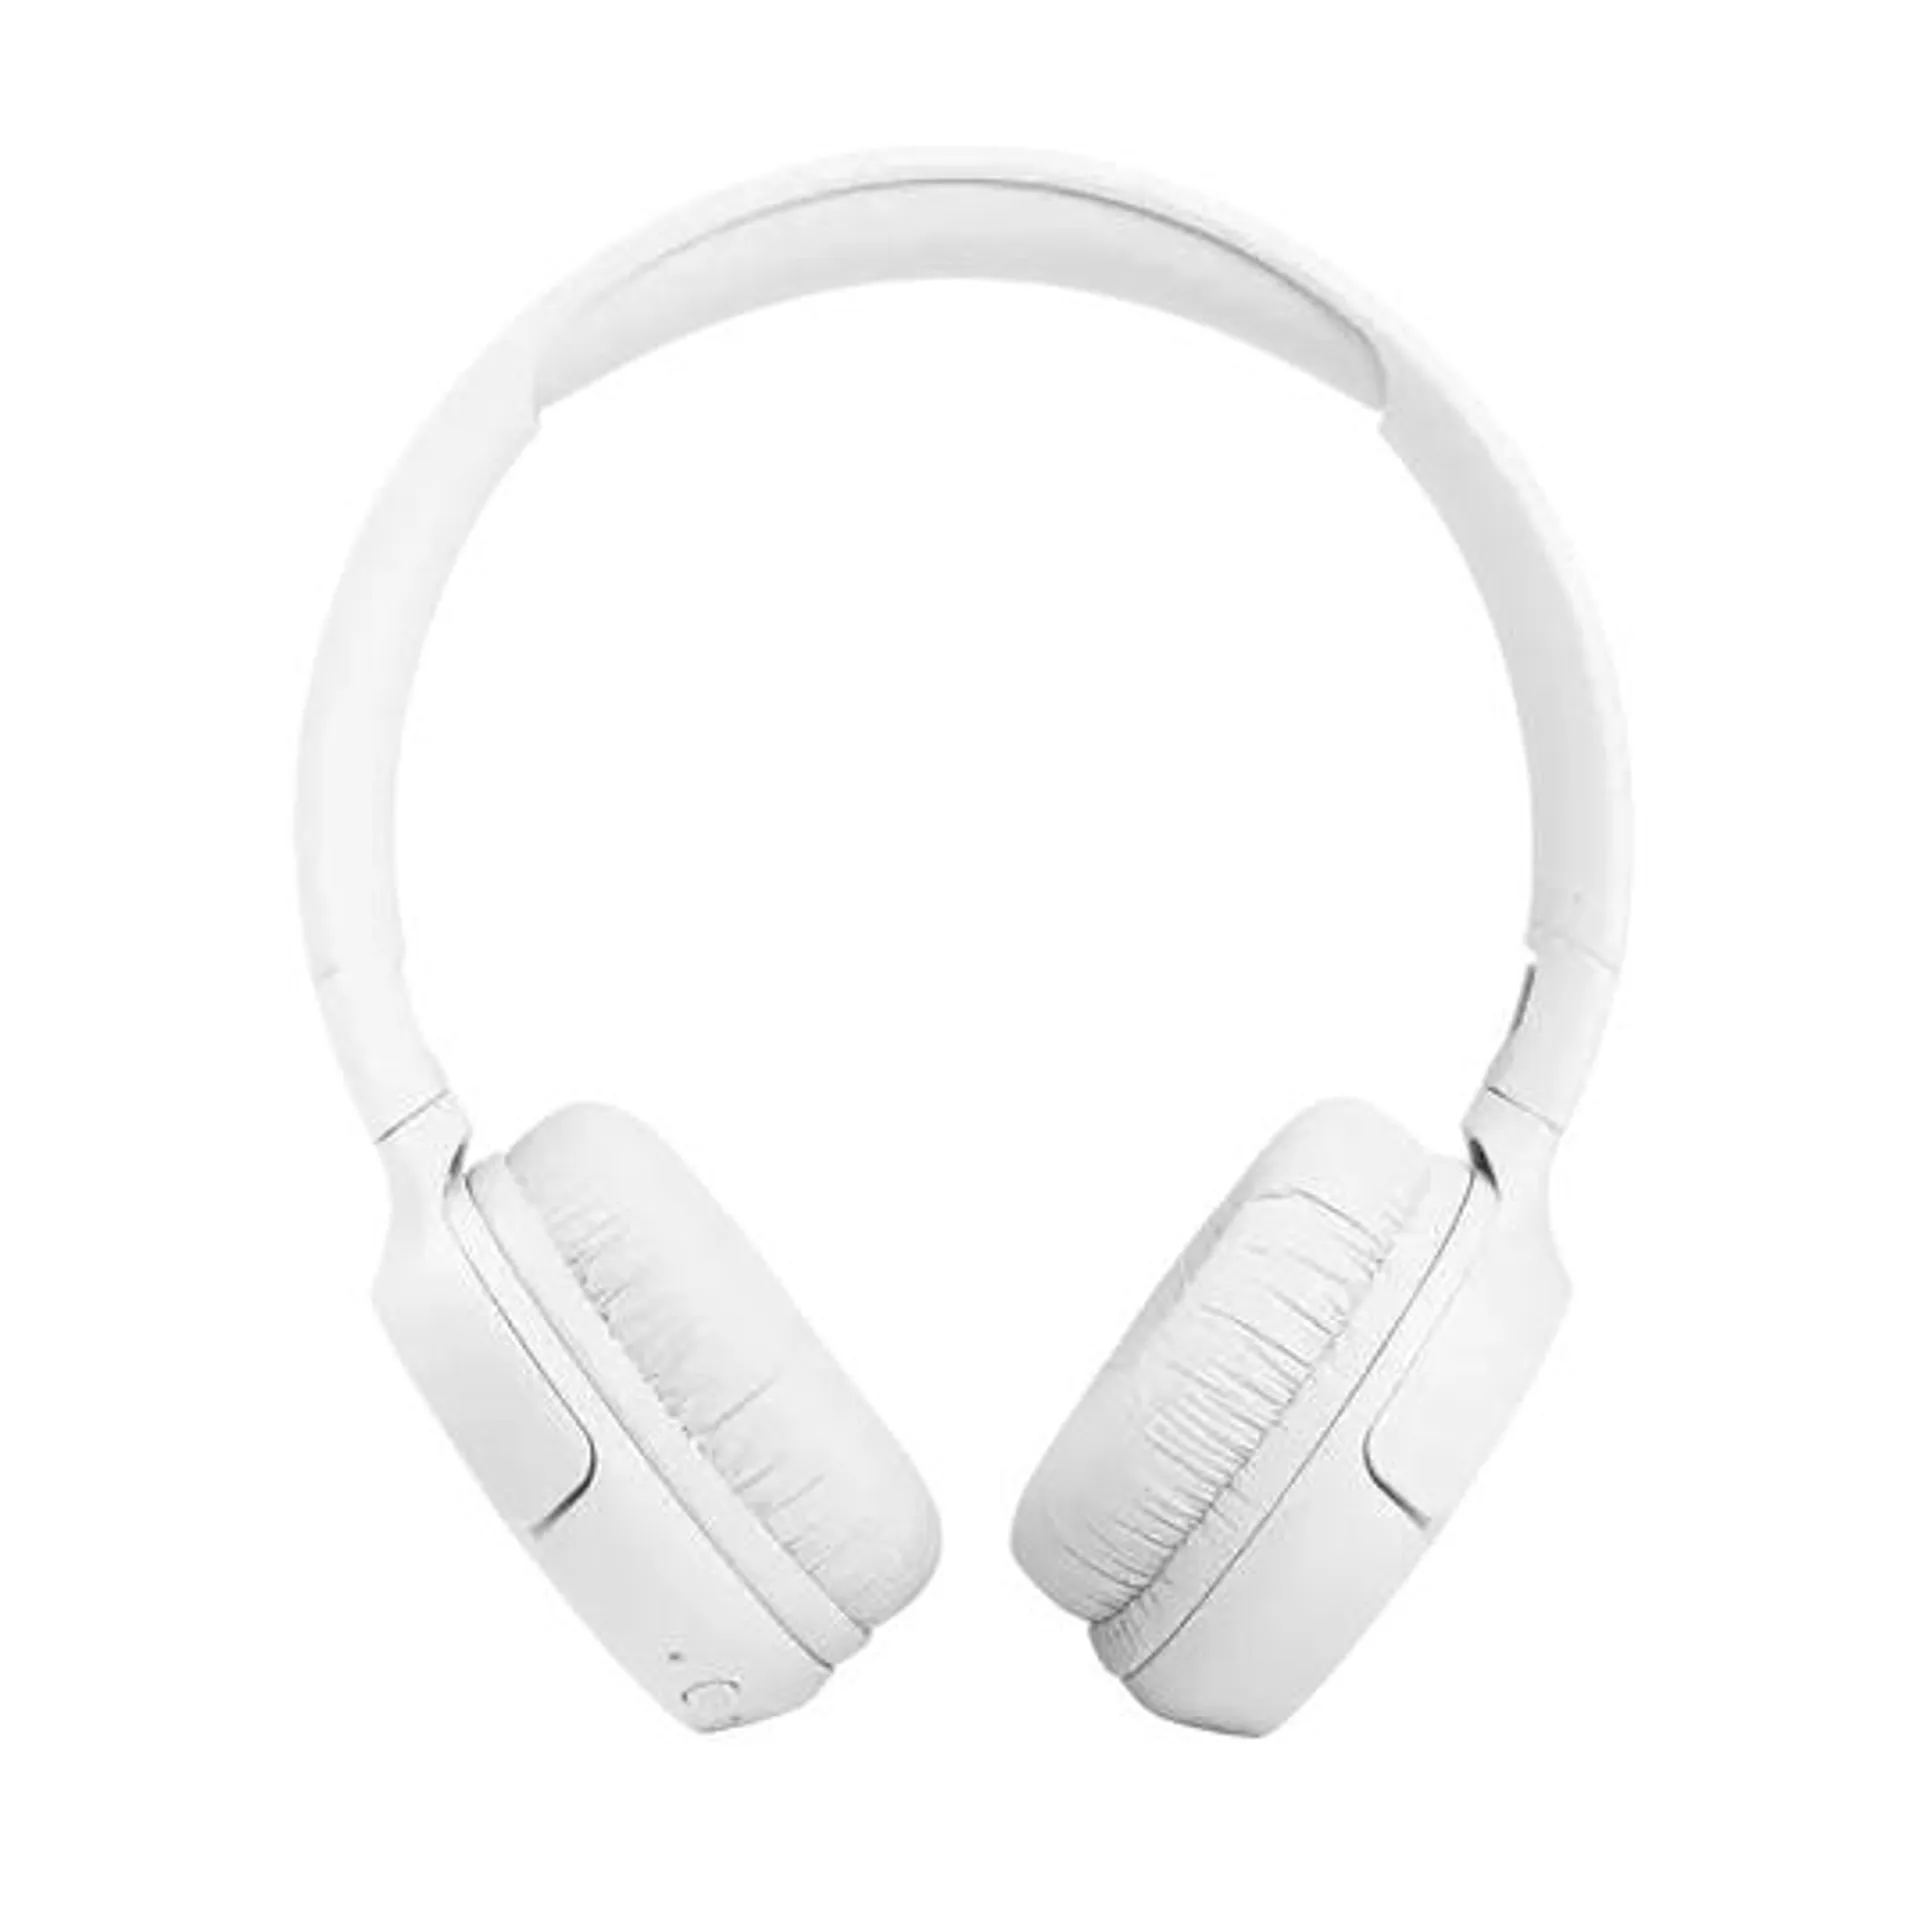 Tune 510BT, On-ear wireless headphones, one-button universal remote/mic, White